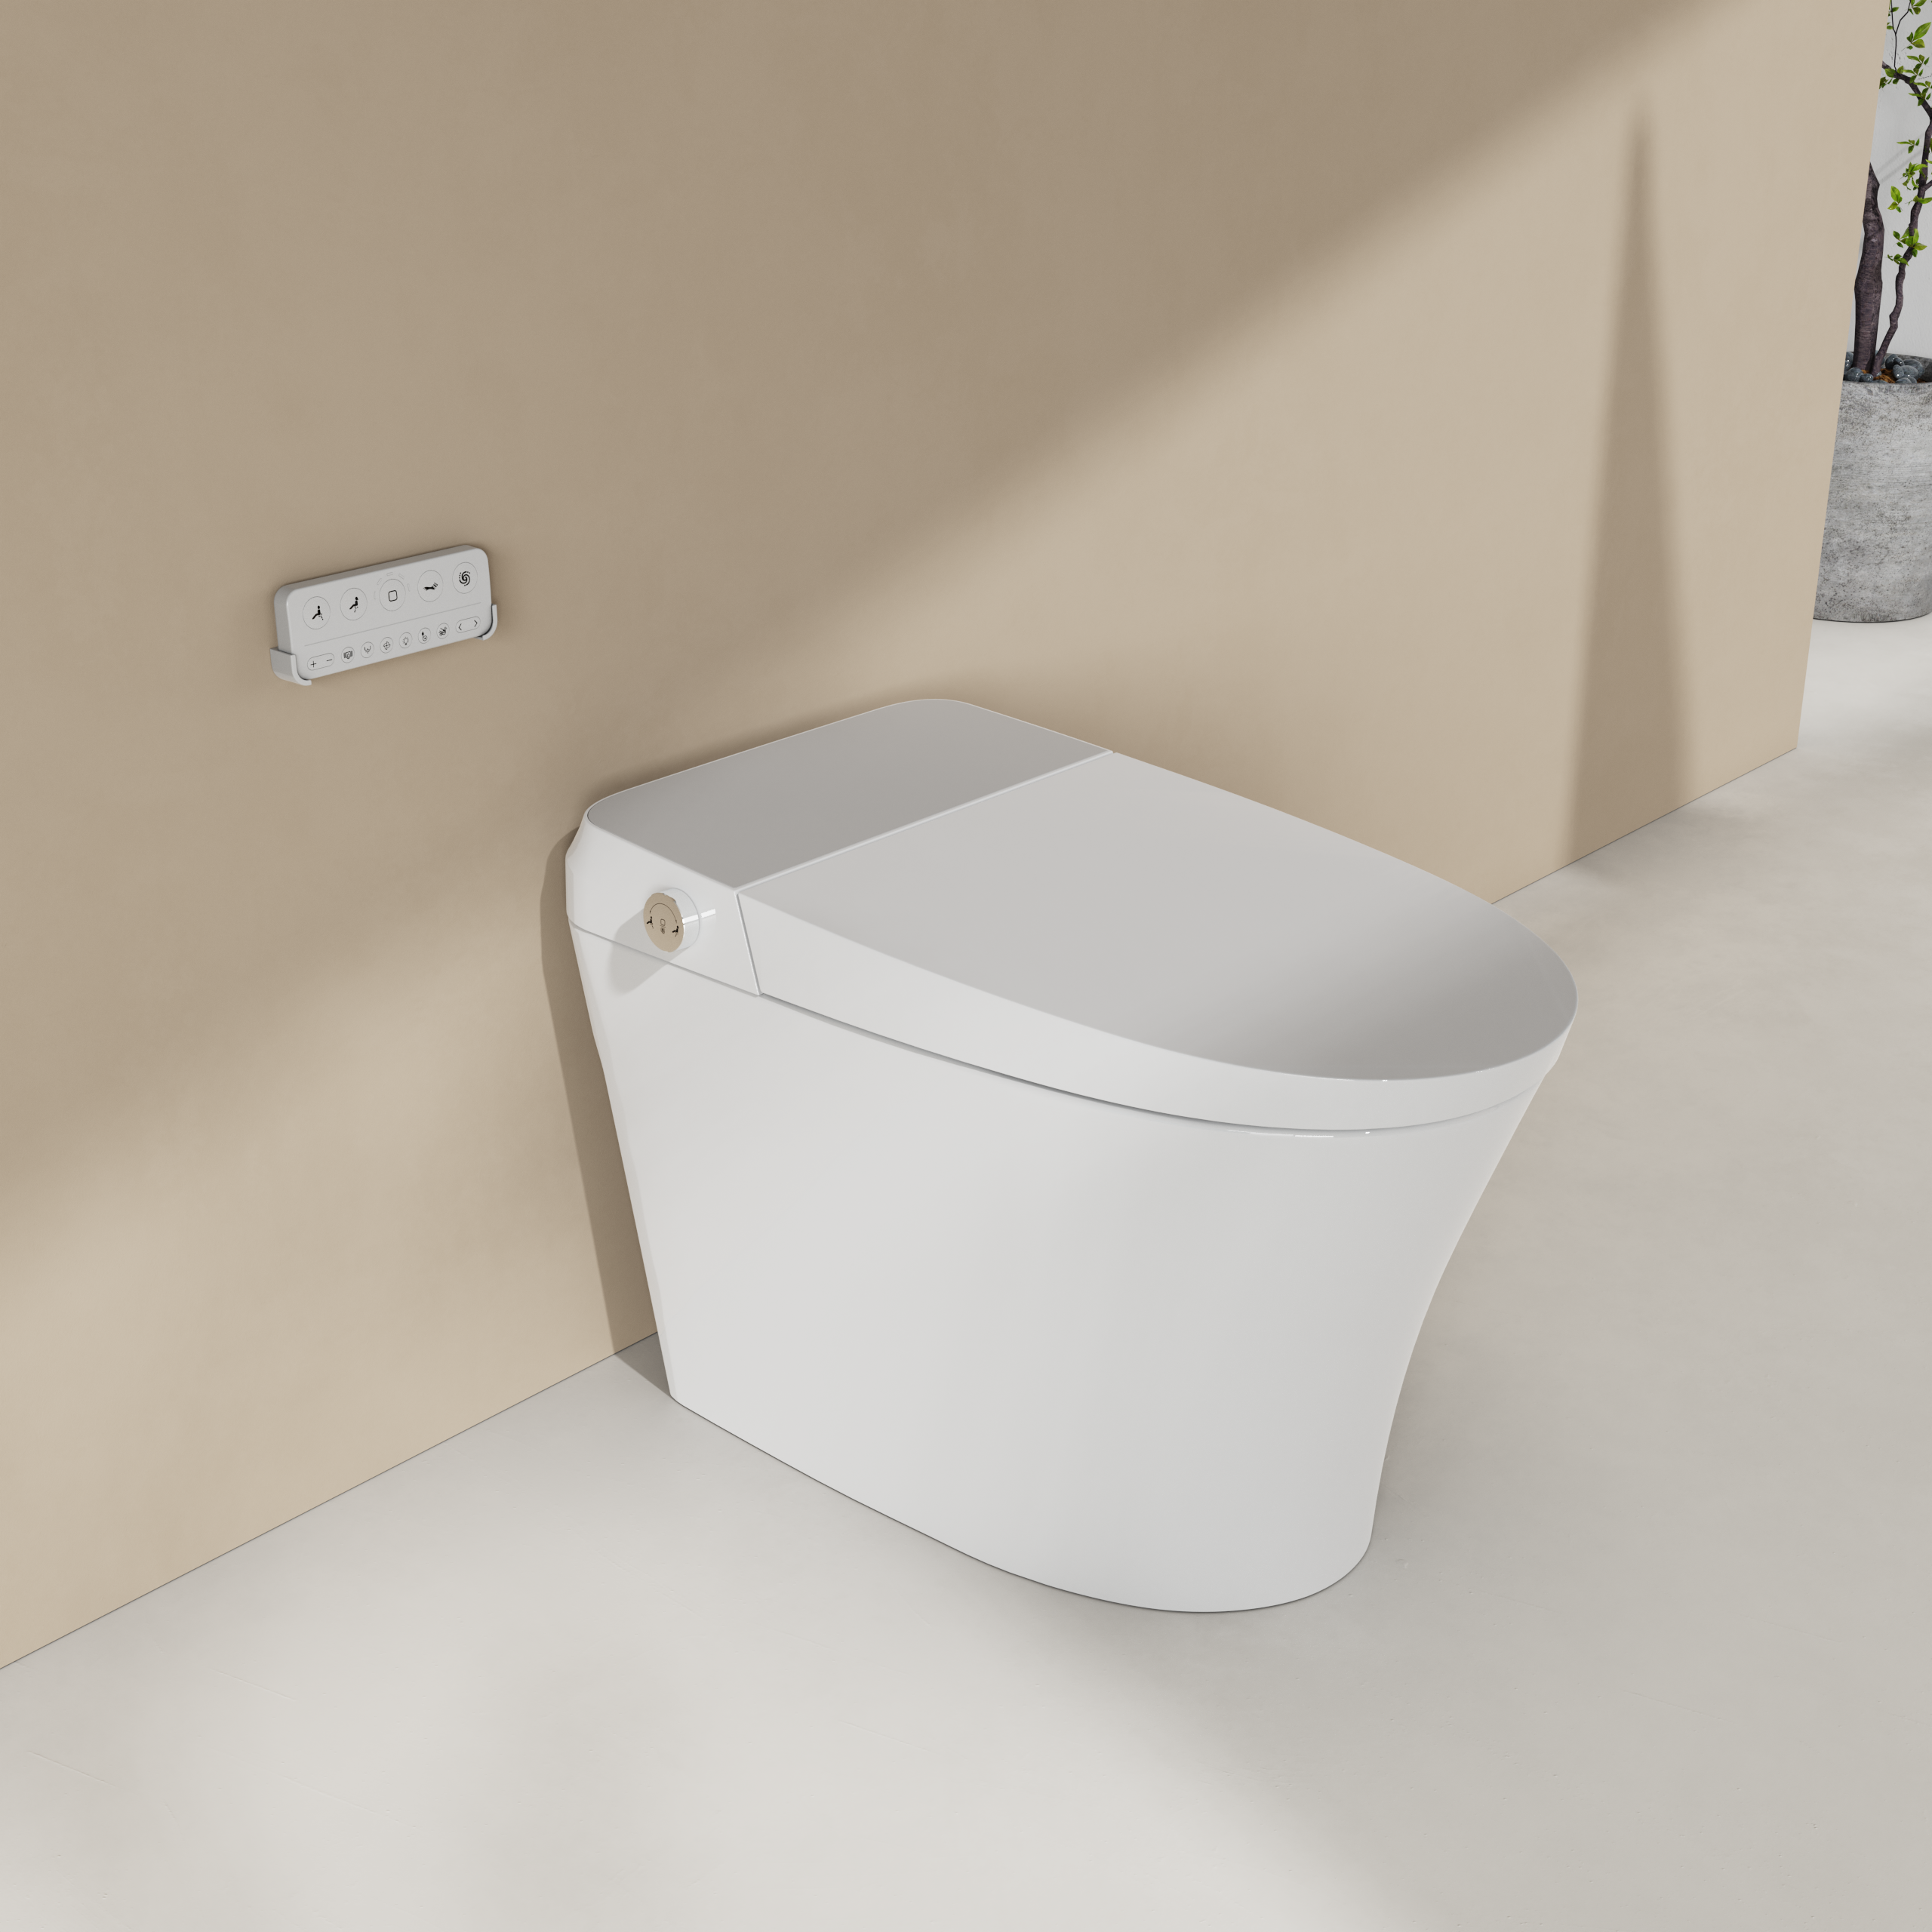 Elongated Smart Toilet Bidet in White with UV-A Sterilization, Auto Flush, Heated Seat and Remote